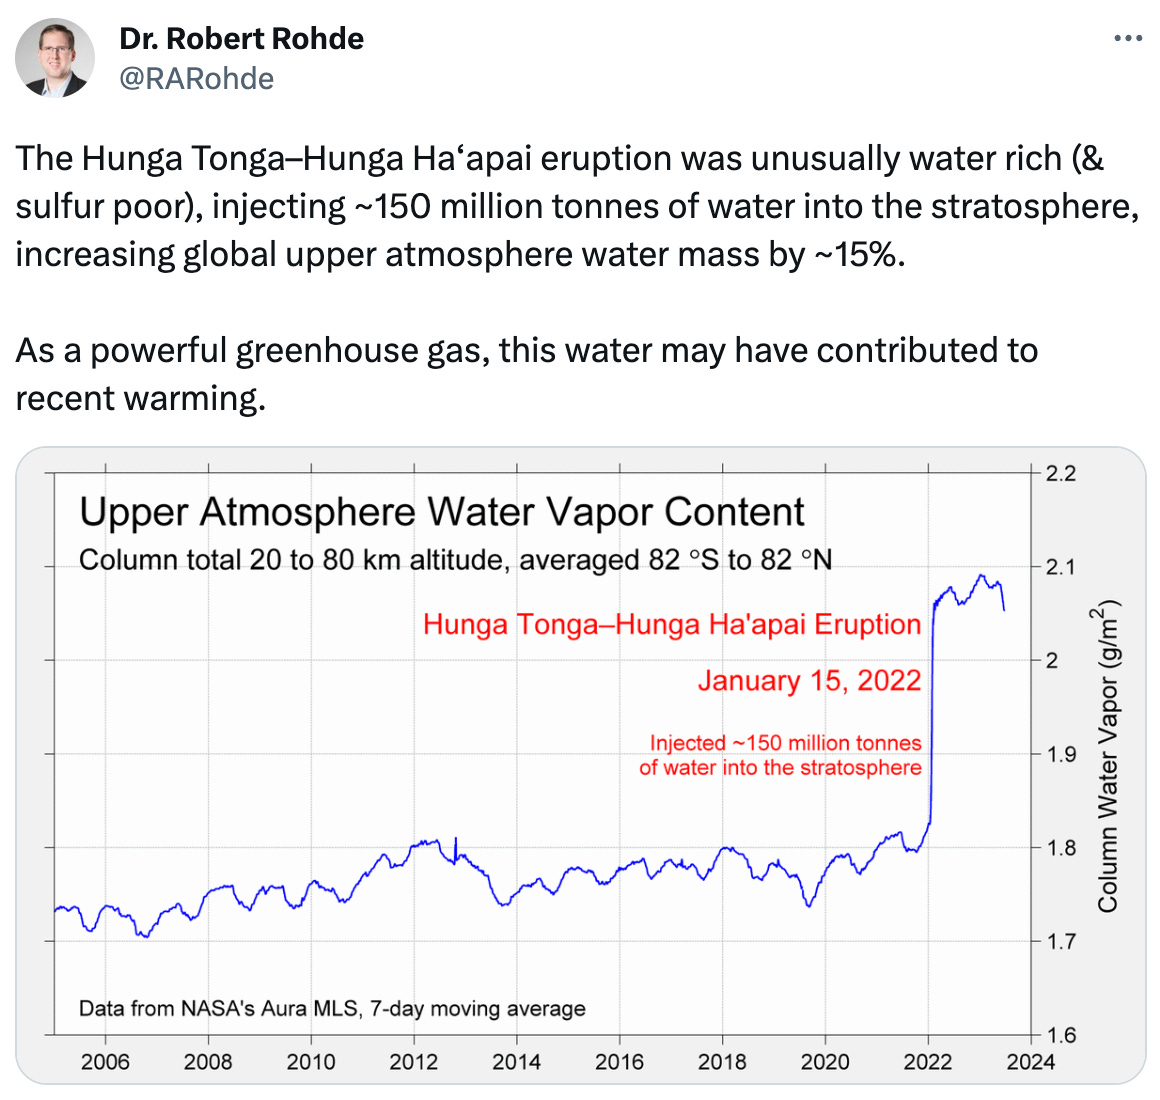  Dr. Robert Rohde @RARohde The Hunga Tonga–Hunga Haʻapai eruption was unusually water rich (& sulfur poor), injecting ~150 million tonnes of water into the stratosphere, increasing global upper atmosphere water mass by ~15%.  As a powerful greenhouse gas, this water may have contributed to recent warming.